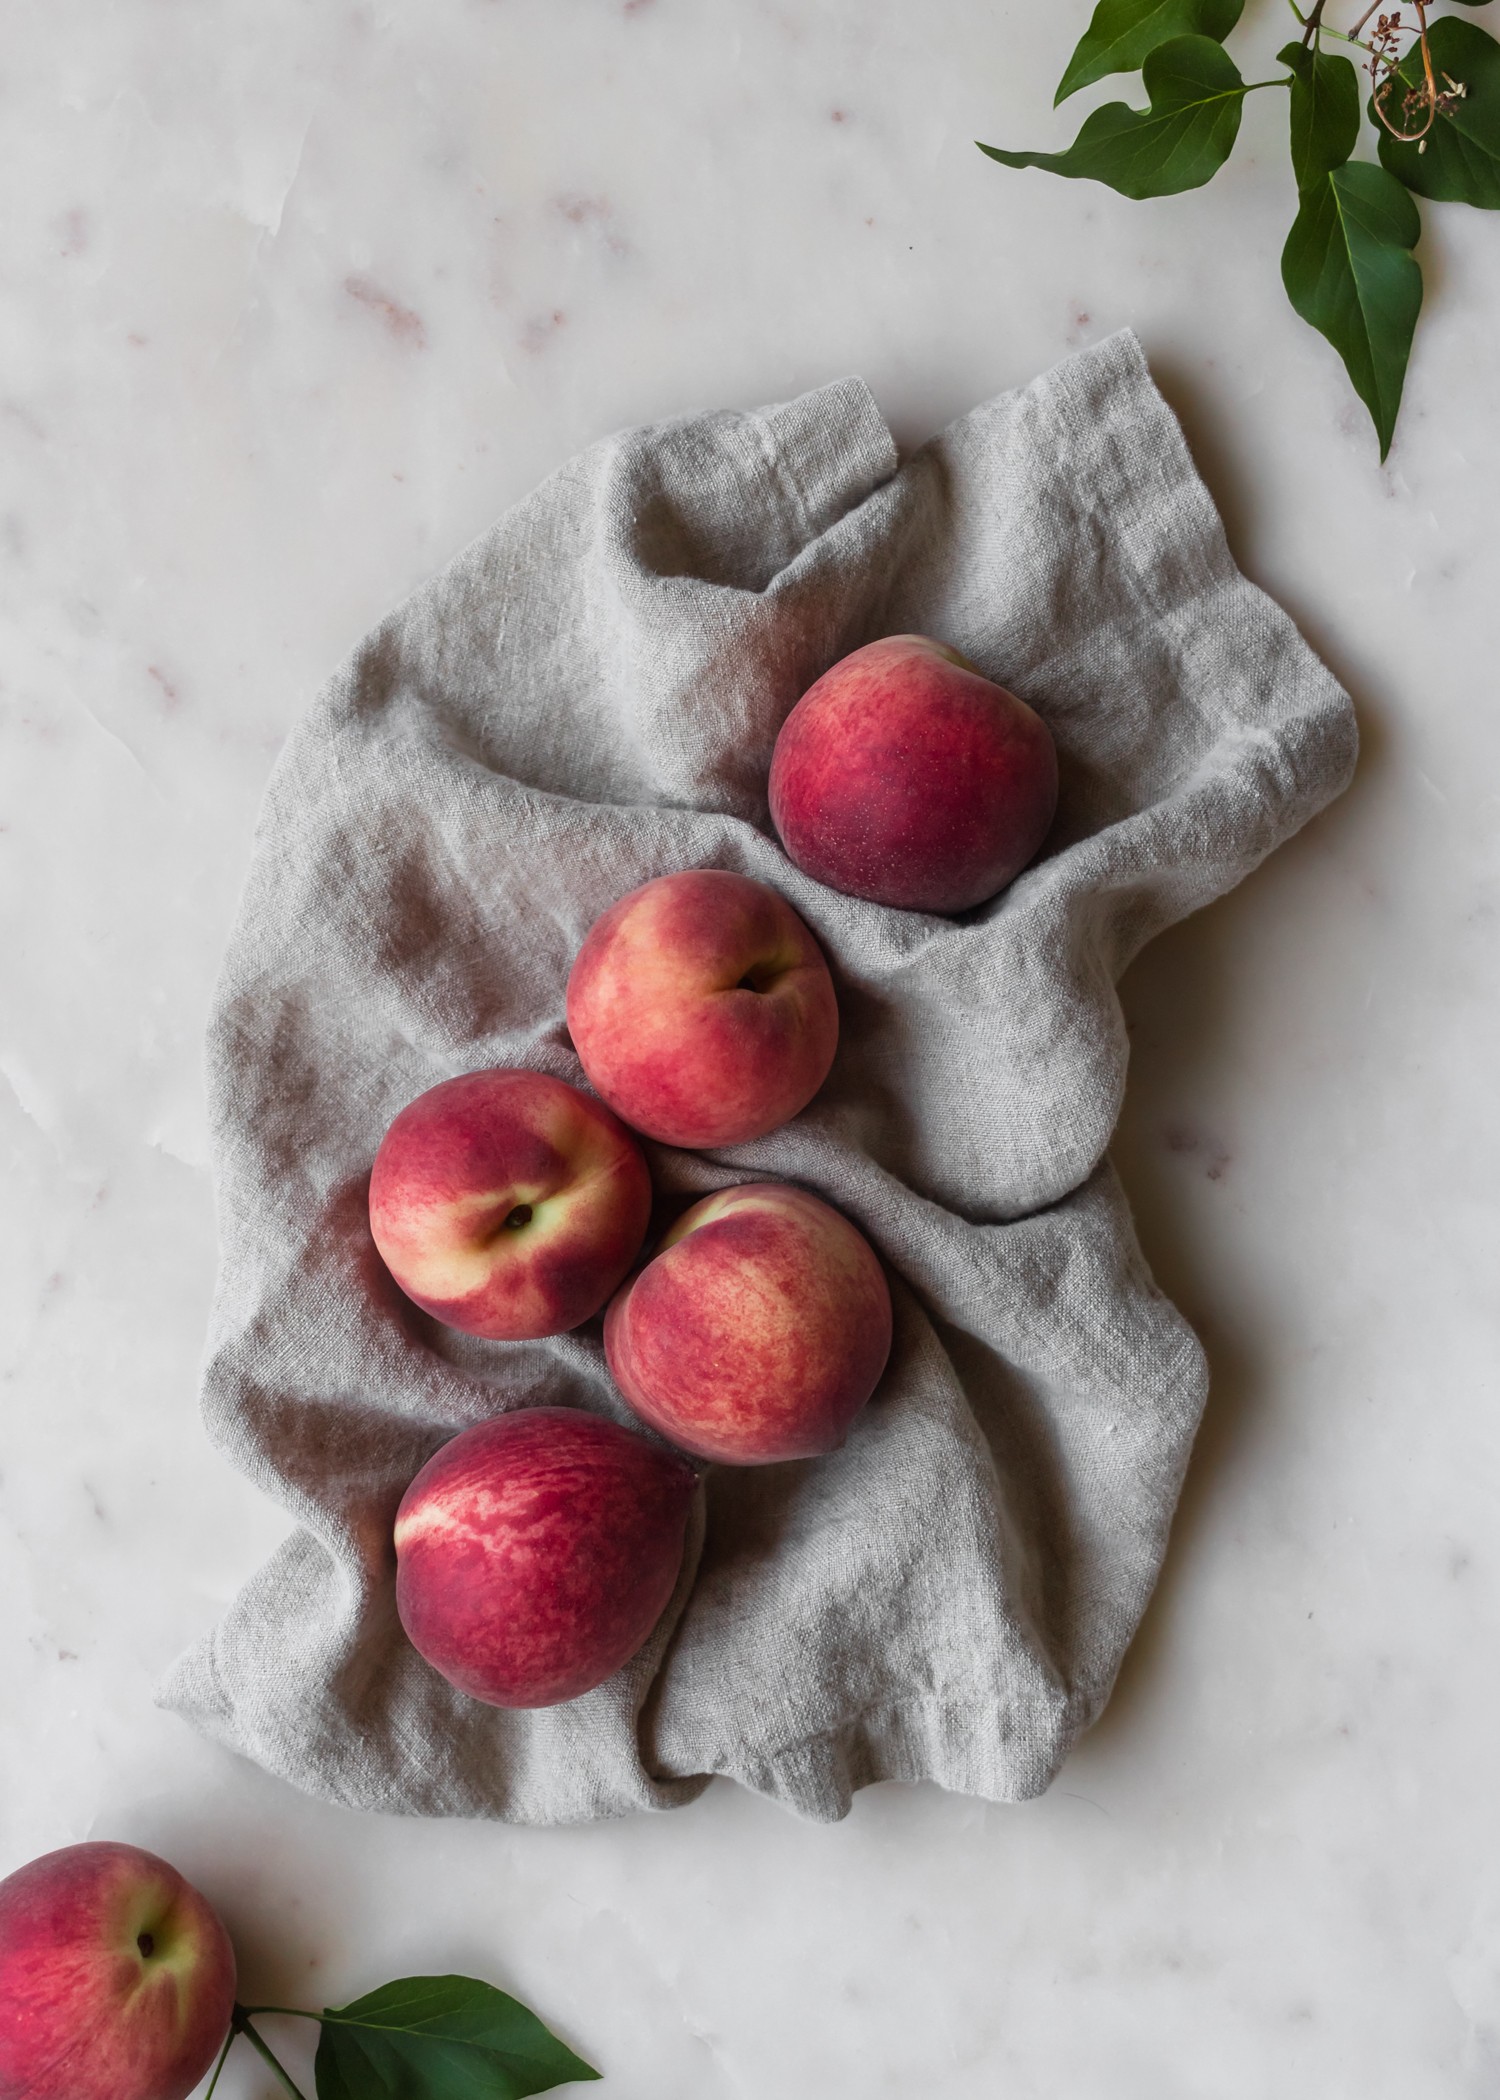 A bird's eye shot of peaches on a beige linen sitting on a marble counter next to green leaves.